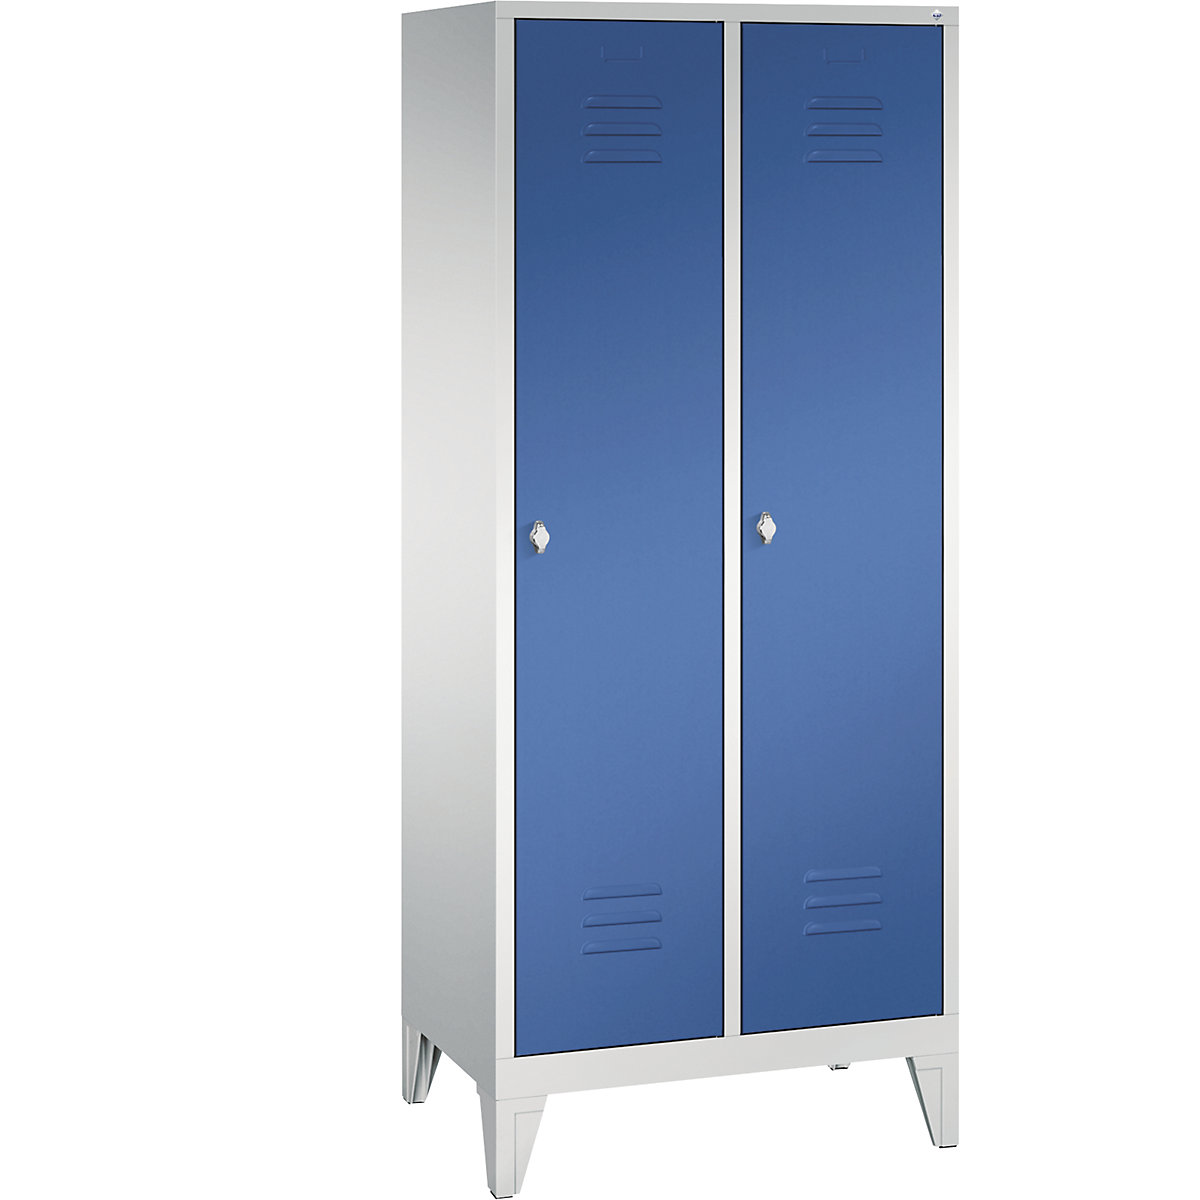 CLASSIC storage cupboard with feet – C+P, 2 compartments, compartment width 400 mm, light grey / gentian blue-11